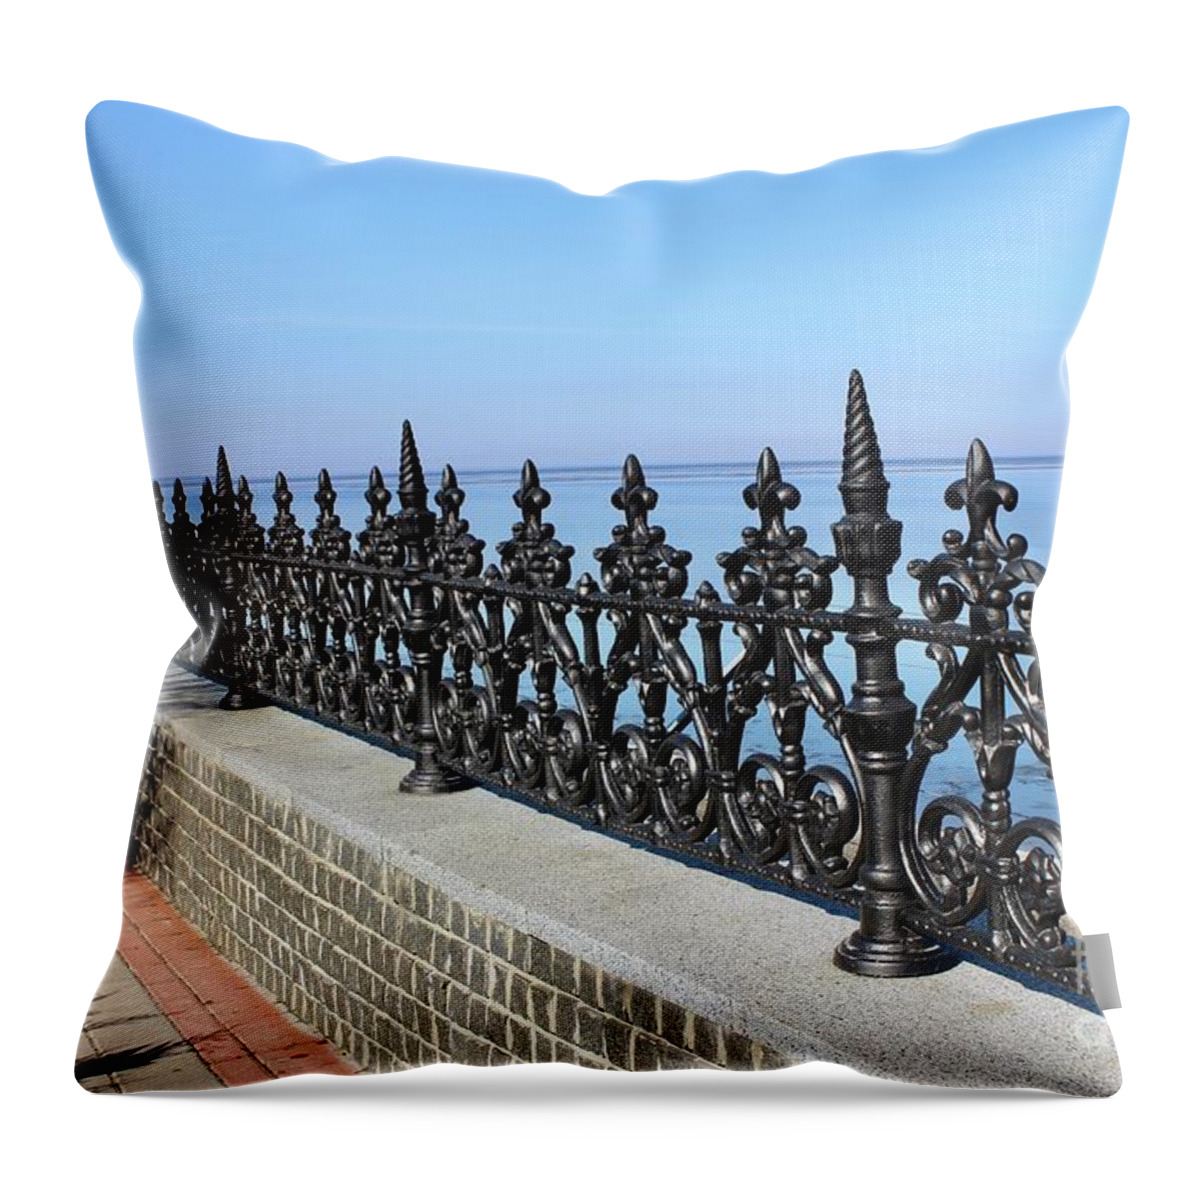  Throw Pillow featuring the photograph Decorative fence by Annamaria Frost